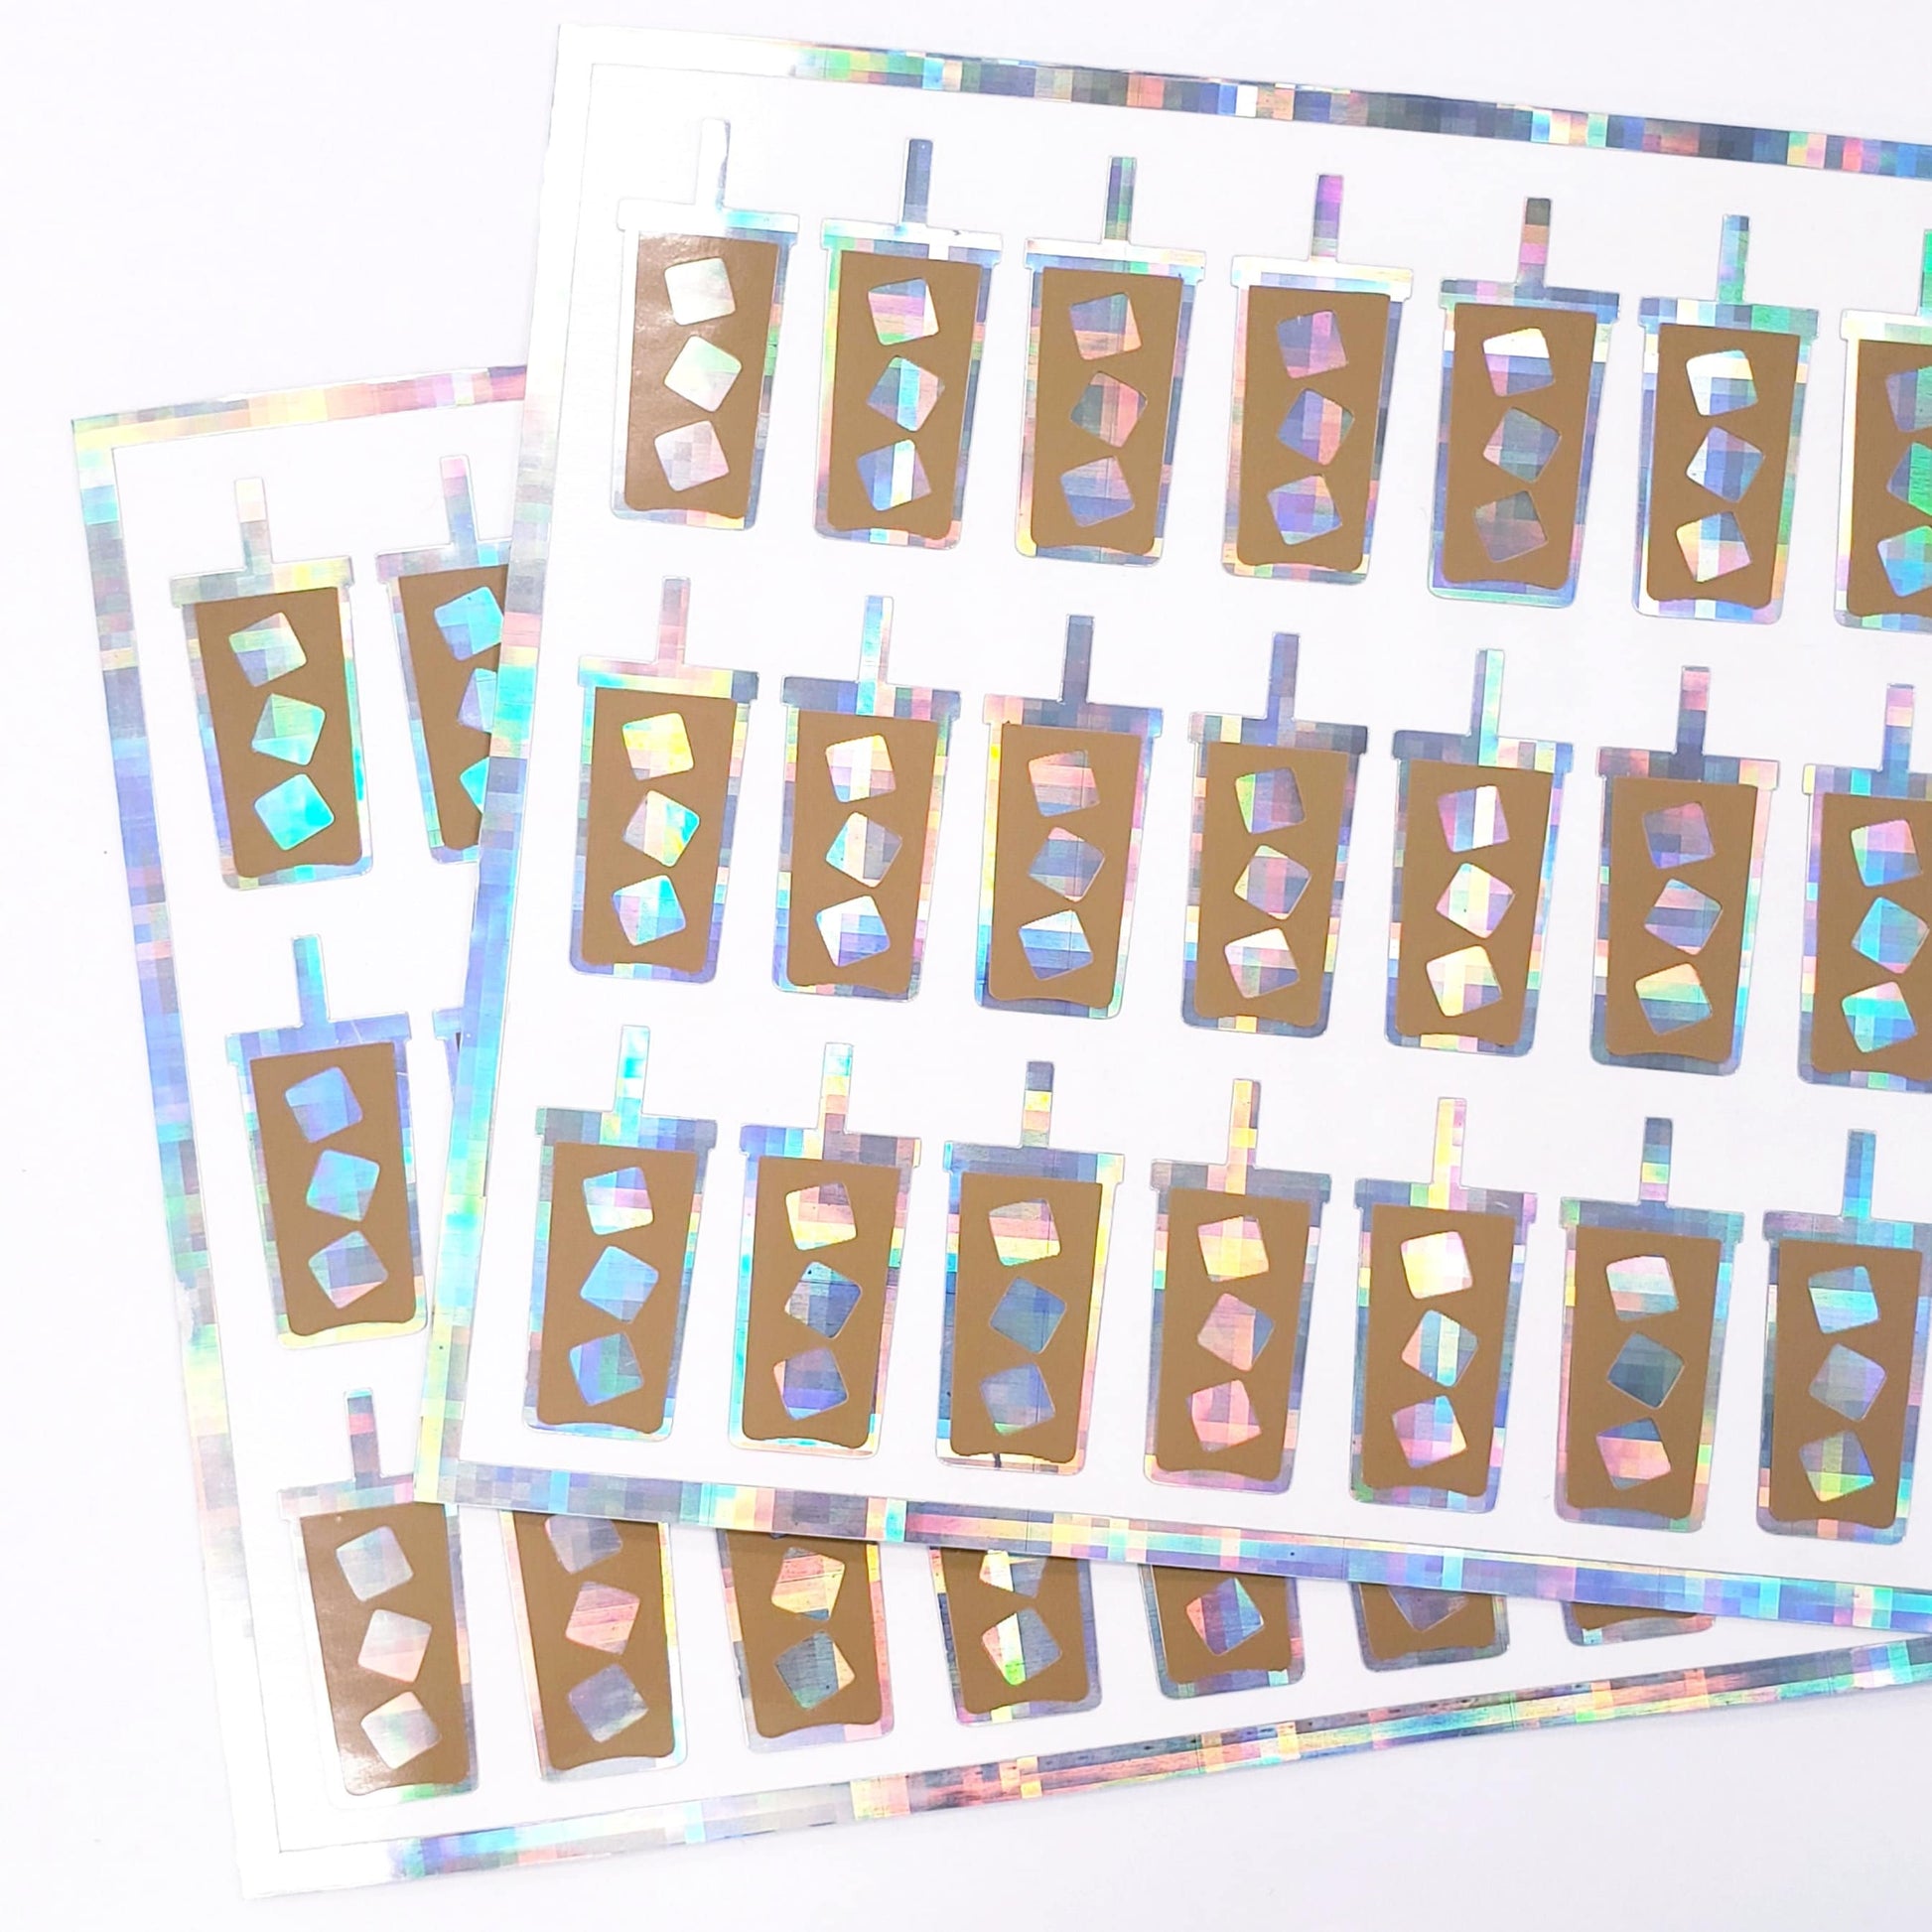 Iced Coffee Stickers, set of 30 cute cold drink holographic stickers for calendars, journals, food trackers, and planners. Coffee lover gift